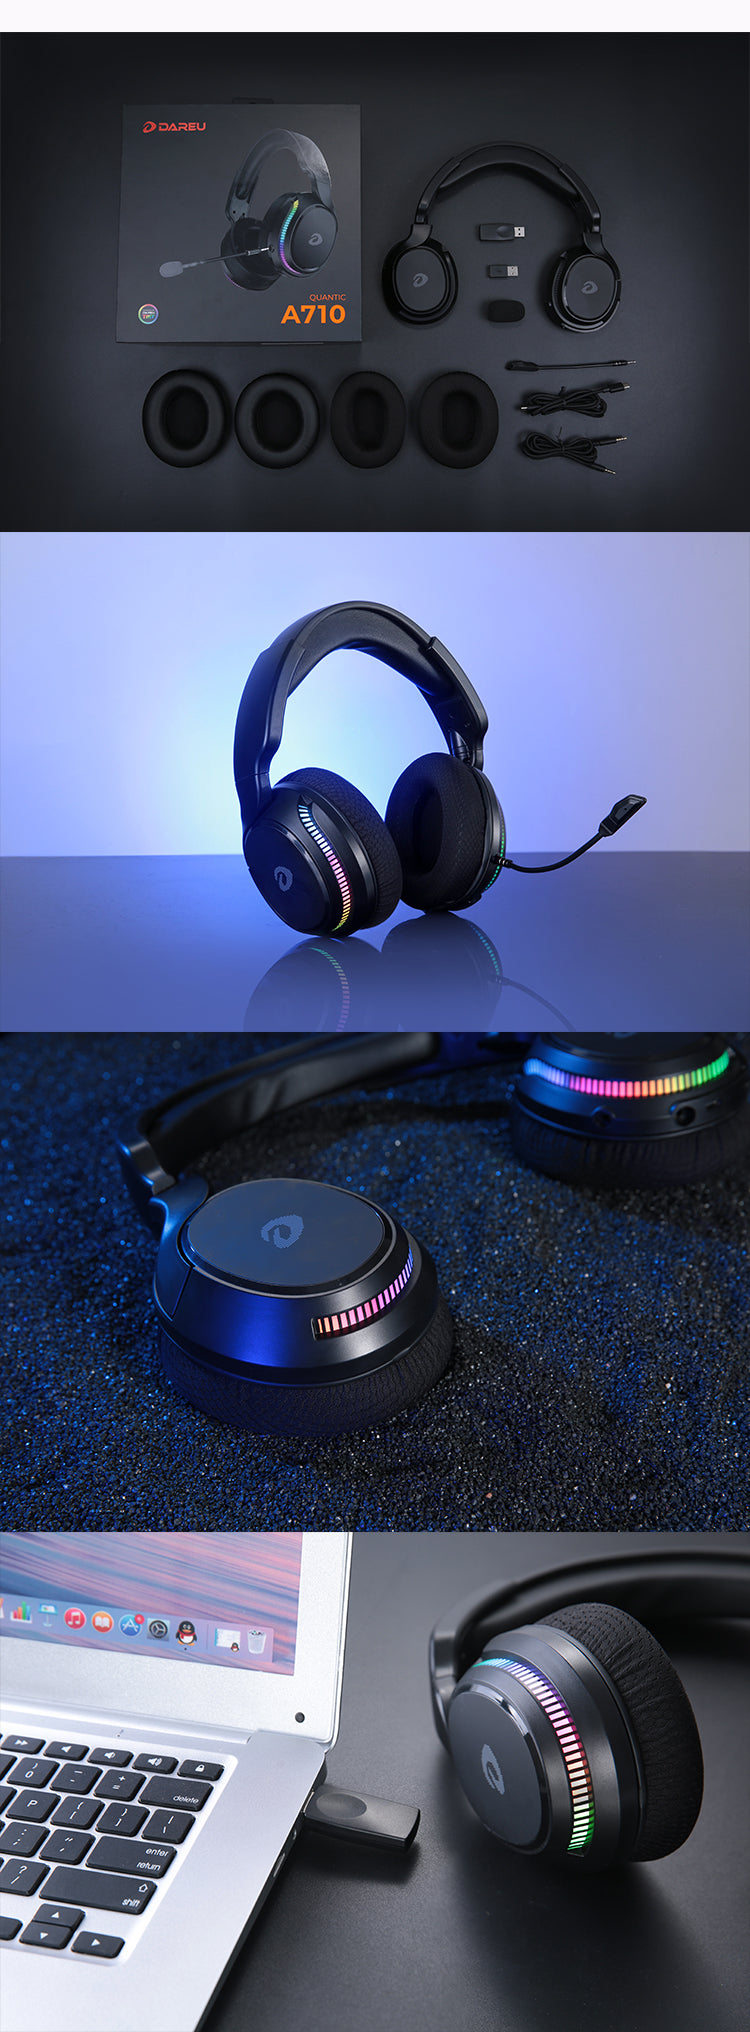 DAREU A710 Tri-Mode (5.8G + Type-C + 3.5mm) Wireless Gaming Headset with RGB Backlit Detachable Mic Noise Cancellation